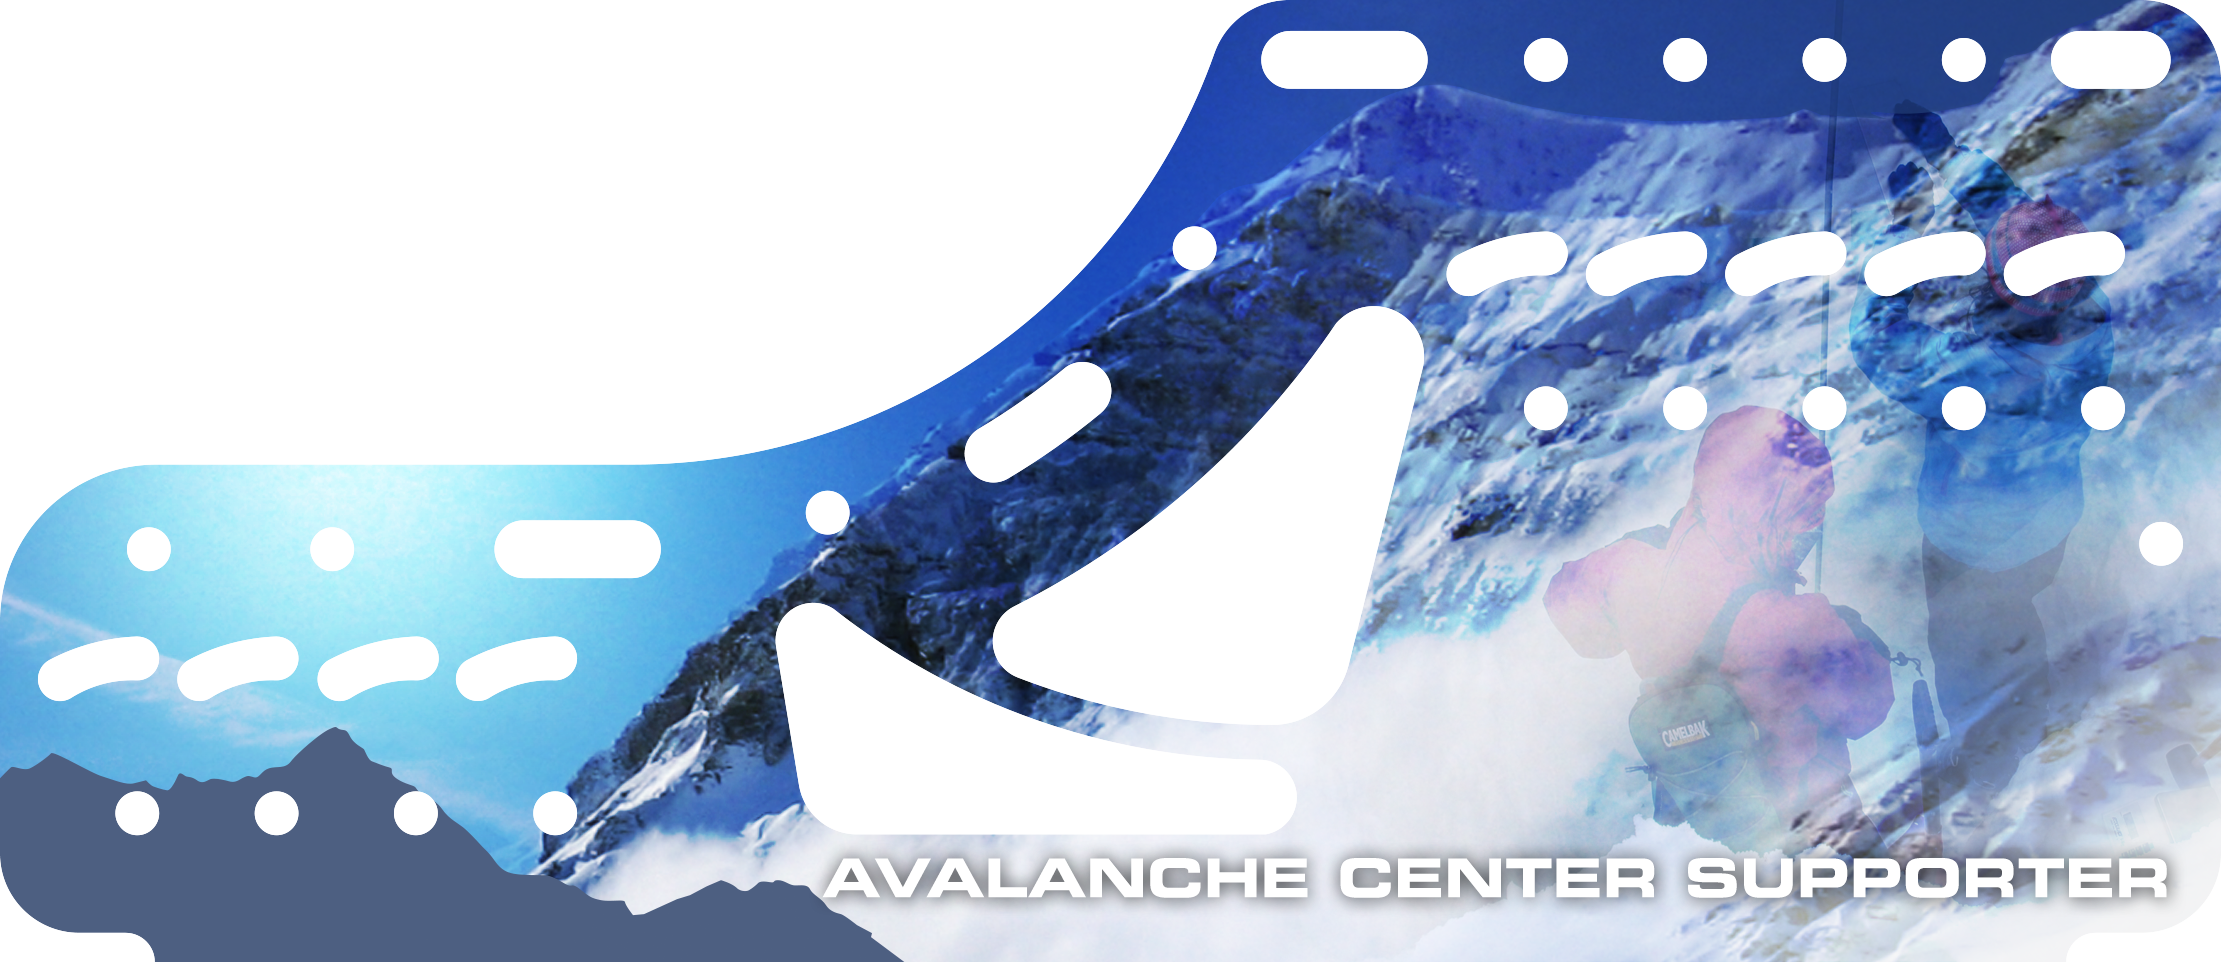 AvalancheSupport1.0.png